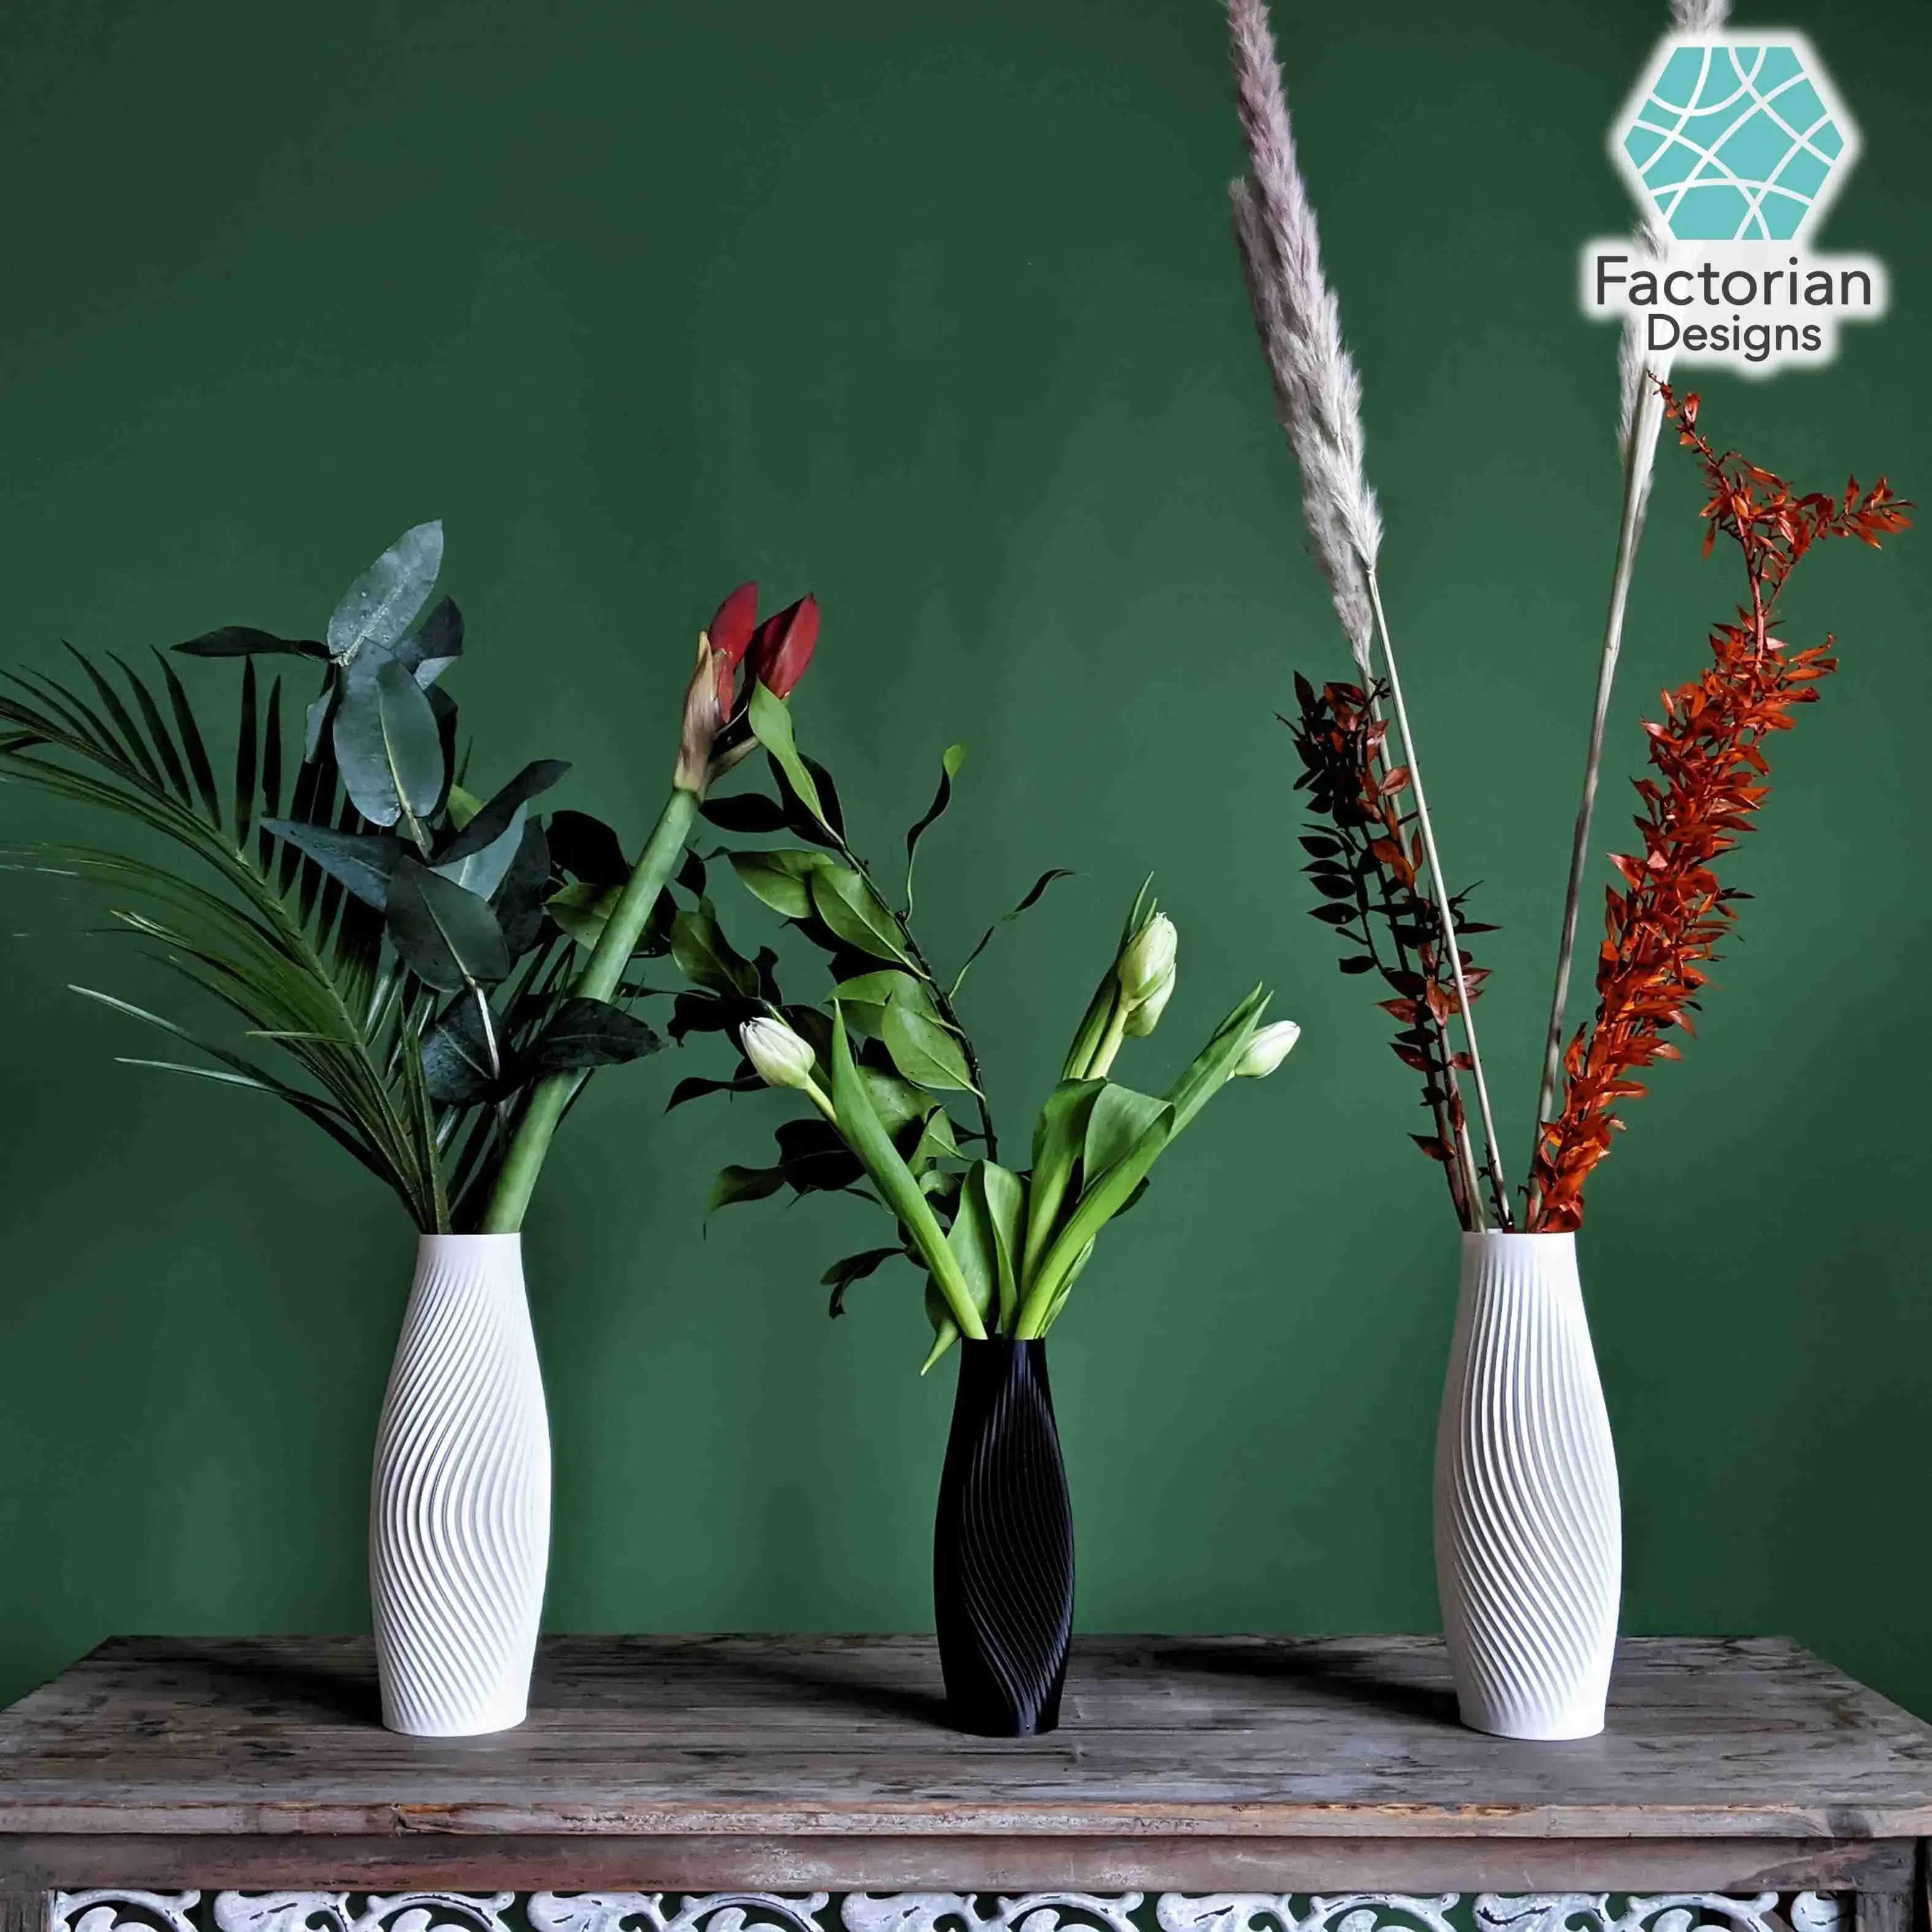 Stunning 3D Printed Vase: Add Style to Your Home Decor!